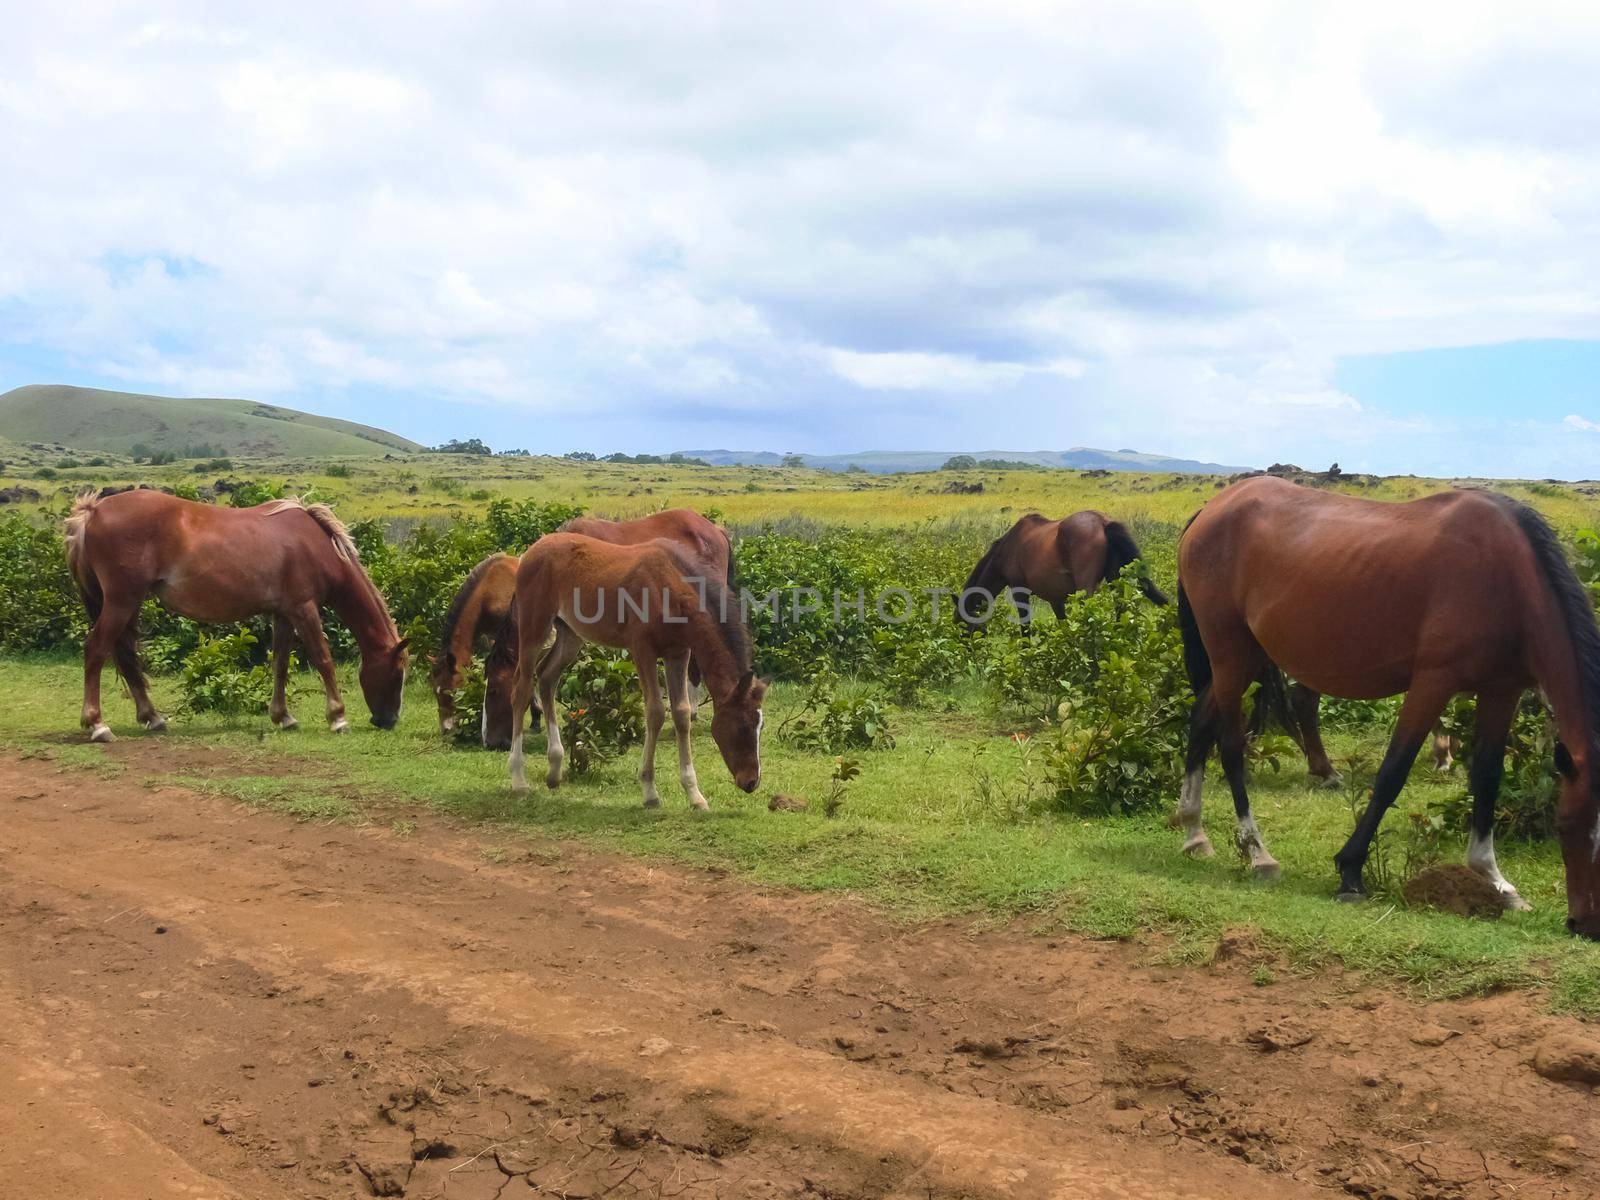 Grazing horses on Easter Island. Horses are imported species for Easter Island. by DePo